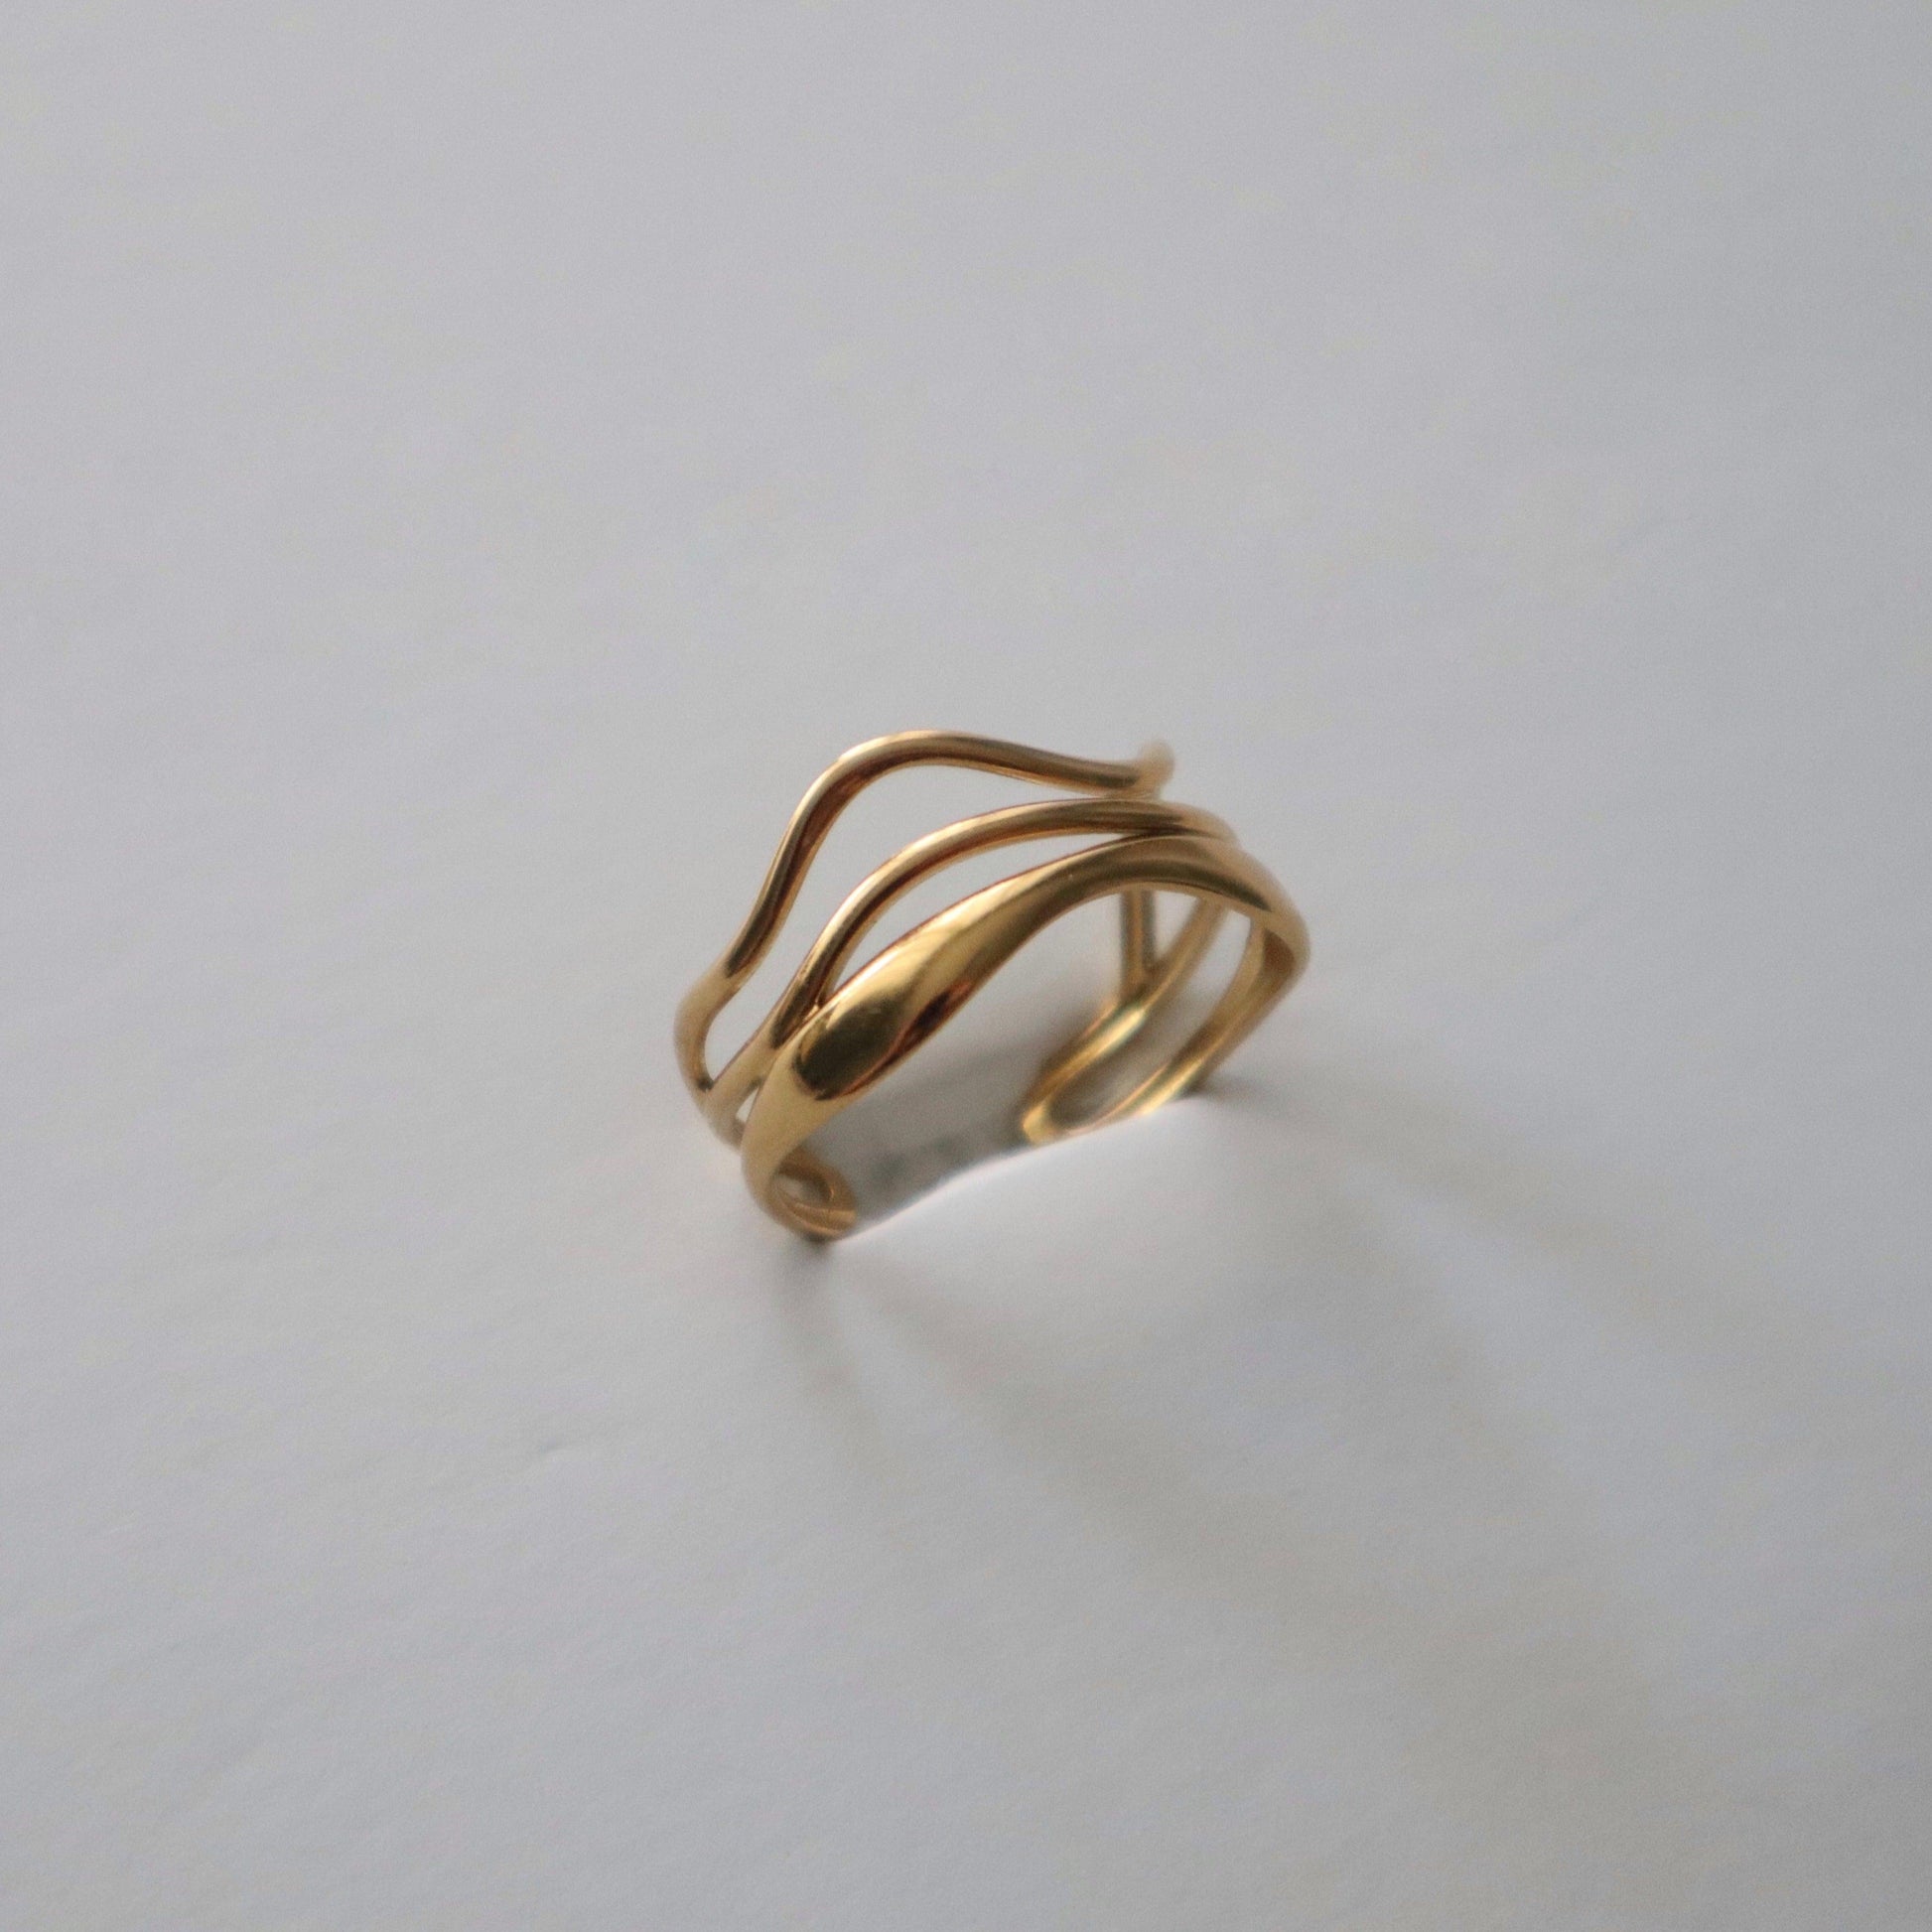 Wavy Ring | Adjustable Multilayer Ring - JESSA JEWELRY | GOLD JEWELRY; dainty, affordable gold everyday jewelry. Tarnish free, water-resistant, hypoallergenic. Jewelry for everyday wear